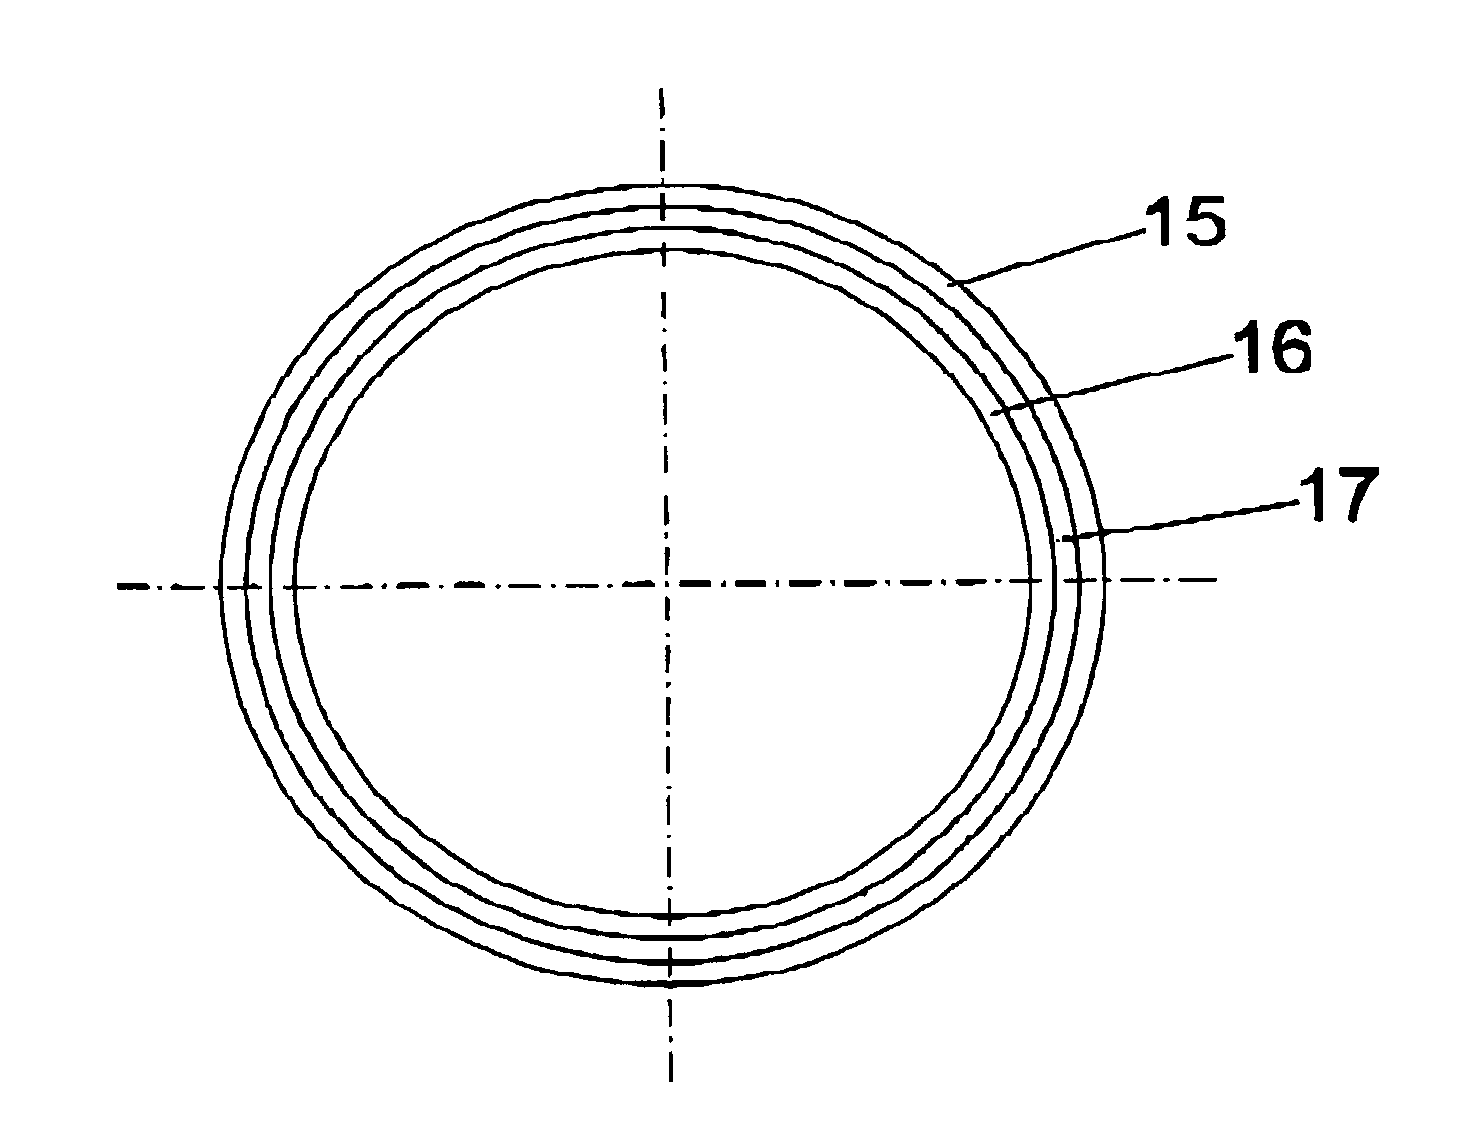 Multilayered cellulose casing, method of manufacture thereof and extrusion head for obtaining said casing